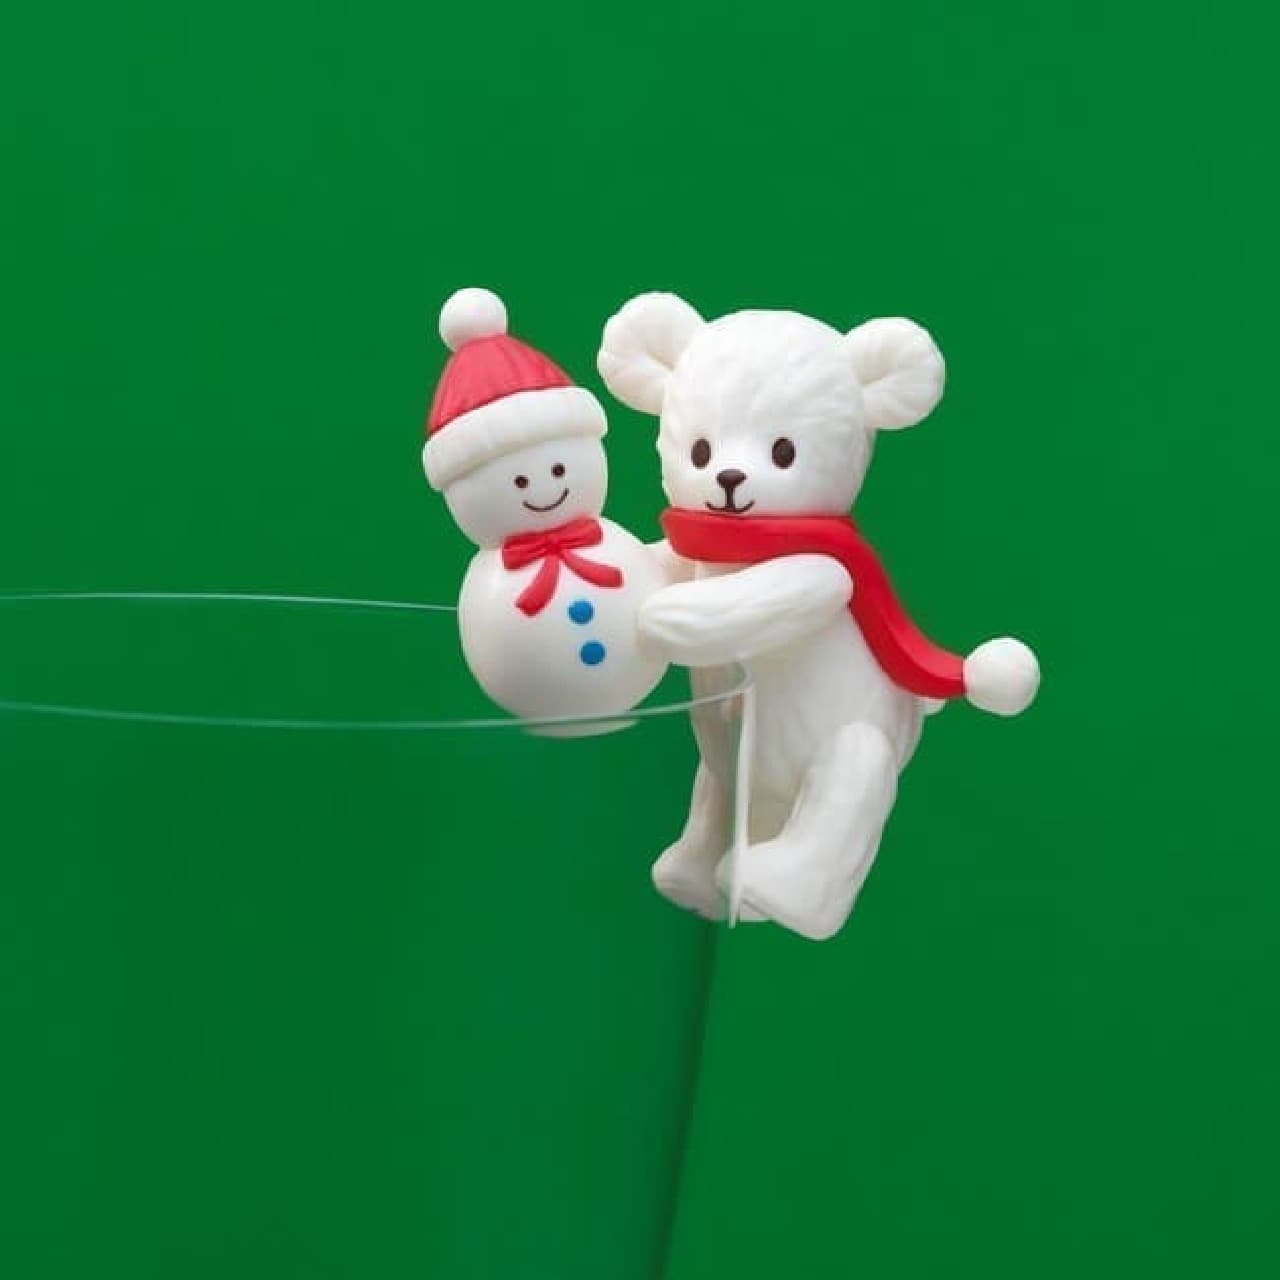 New "Bearful" from Tully's --Petit figure that can be hung on the edge of a cup